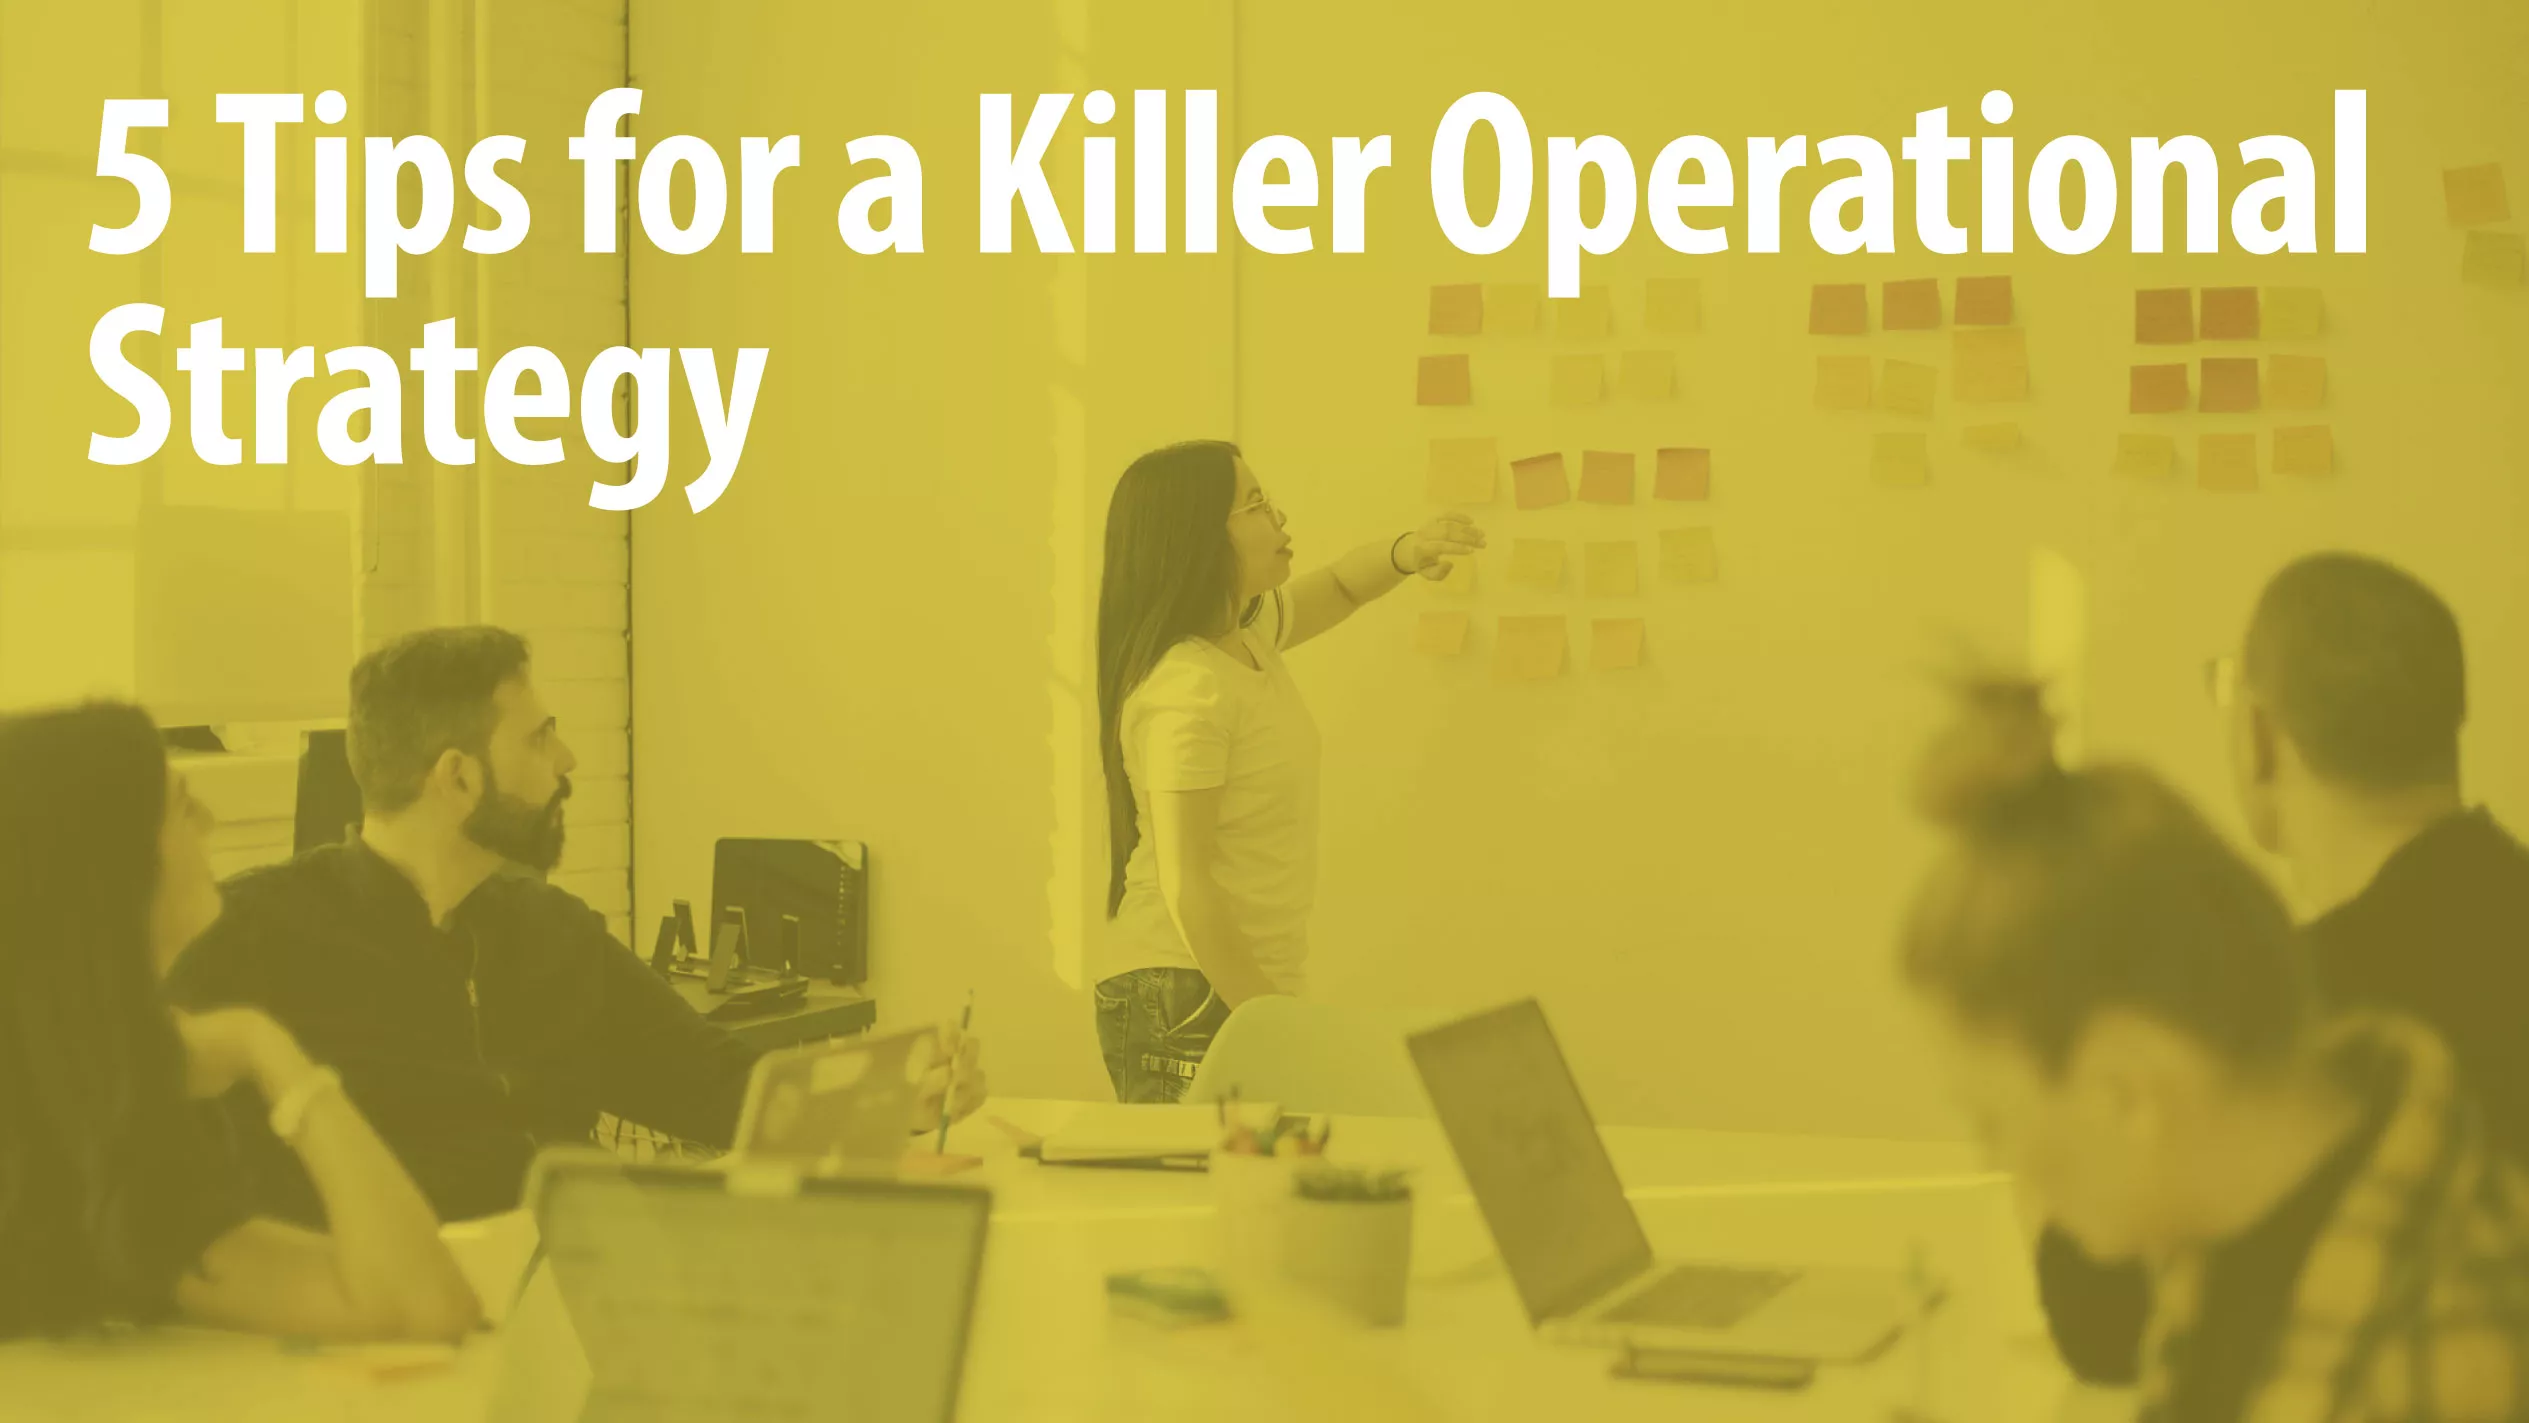 Operational Strategy Tips Article Header